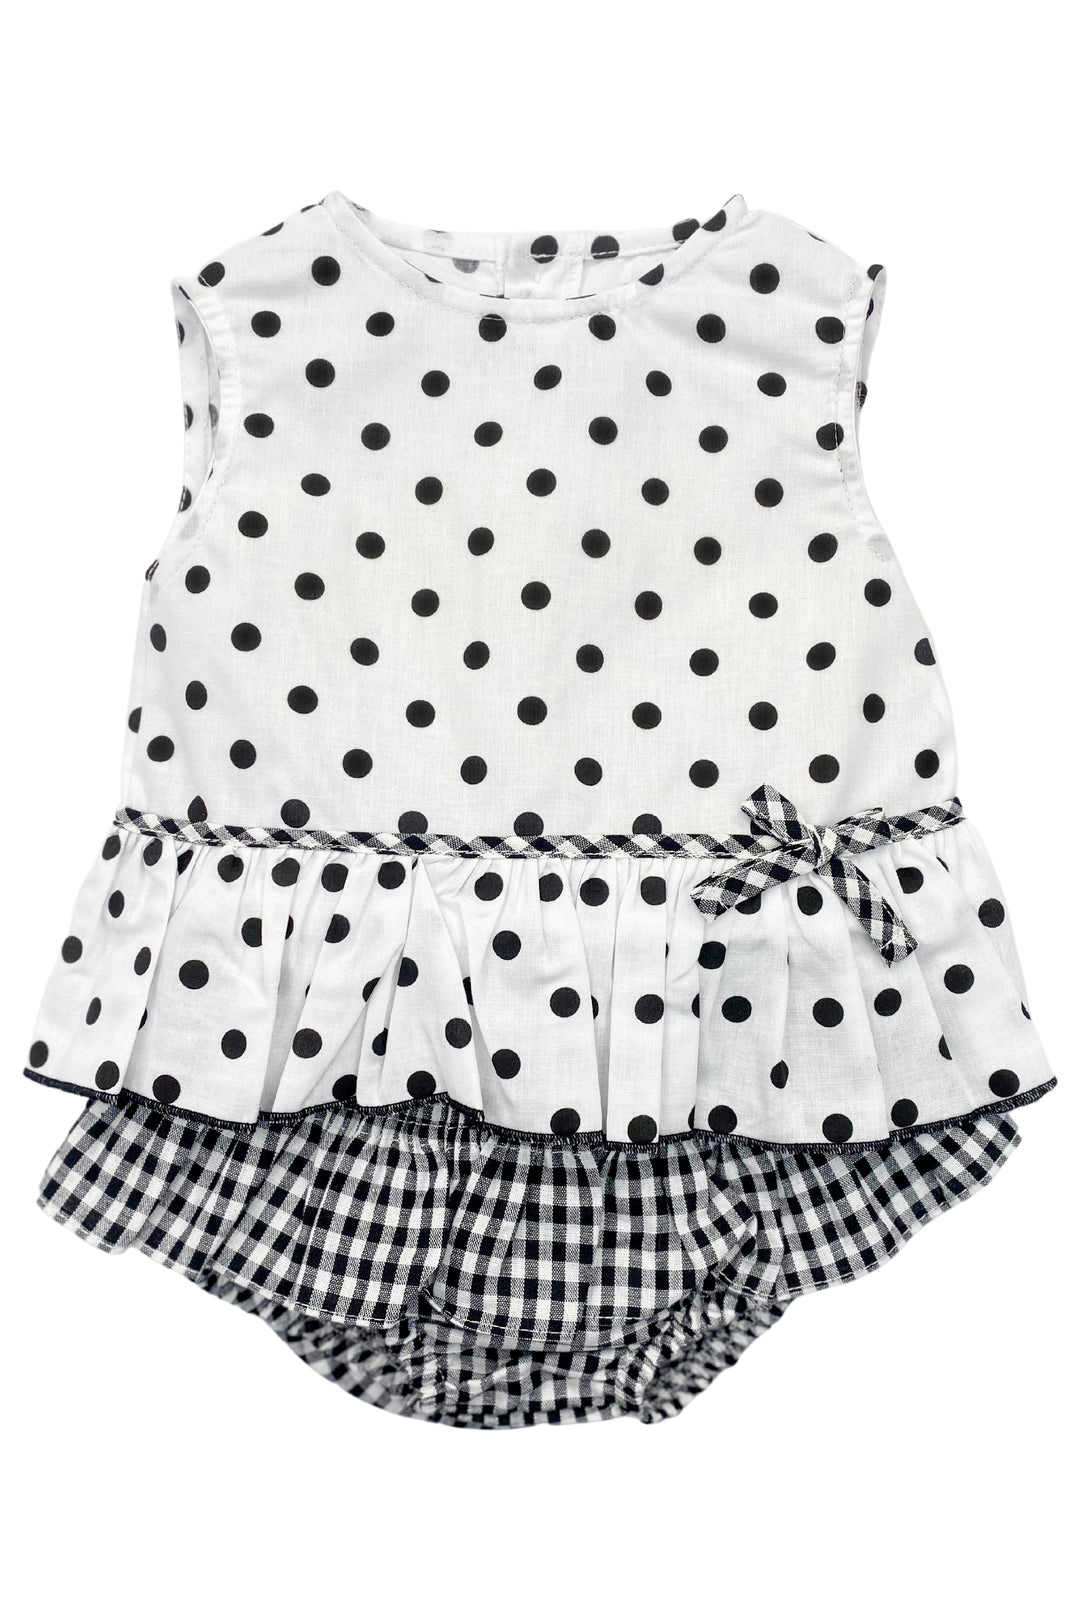 Valentina Bebes "Odette" Black & White Polka Dot Blouse & Bloomers | iphoneandroidapplications